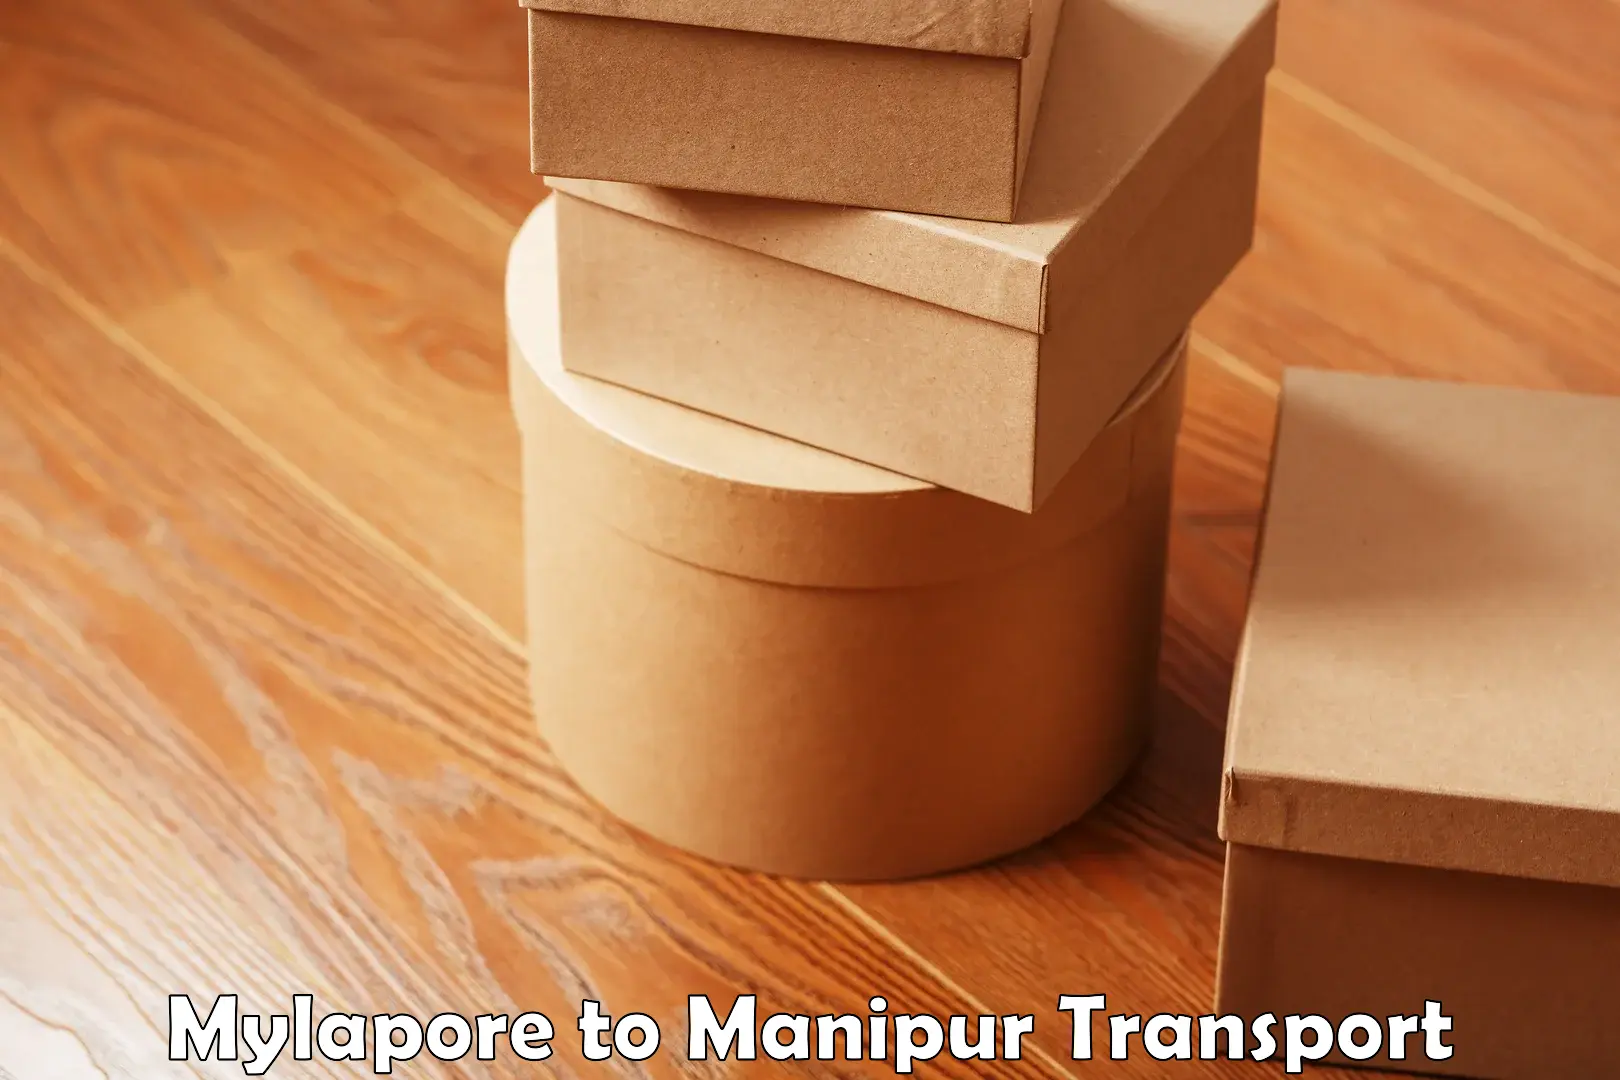 Nearby transport service Mylapore to Manipur